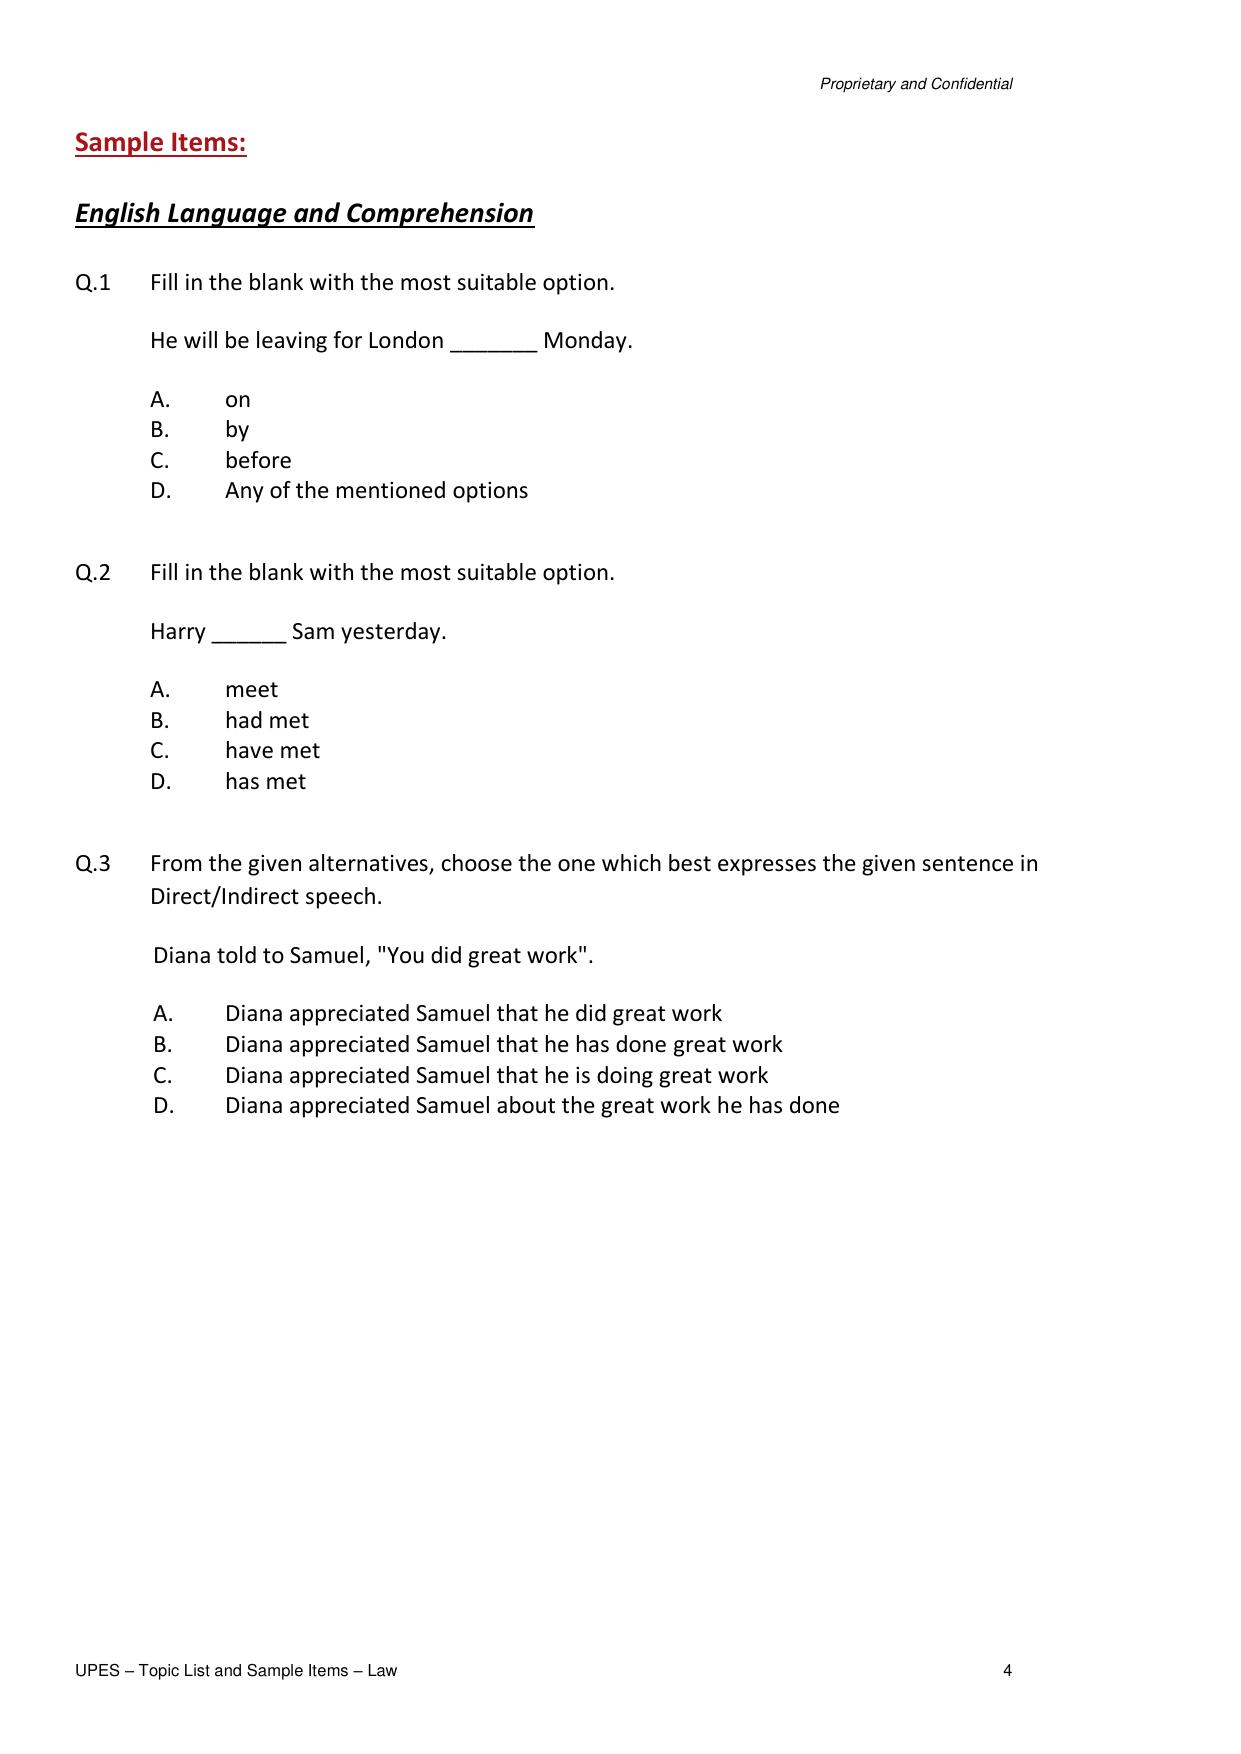 UPES Law Sample Papers - Page 4